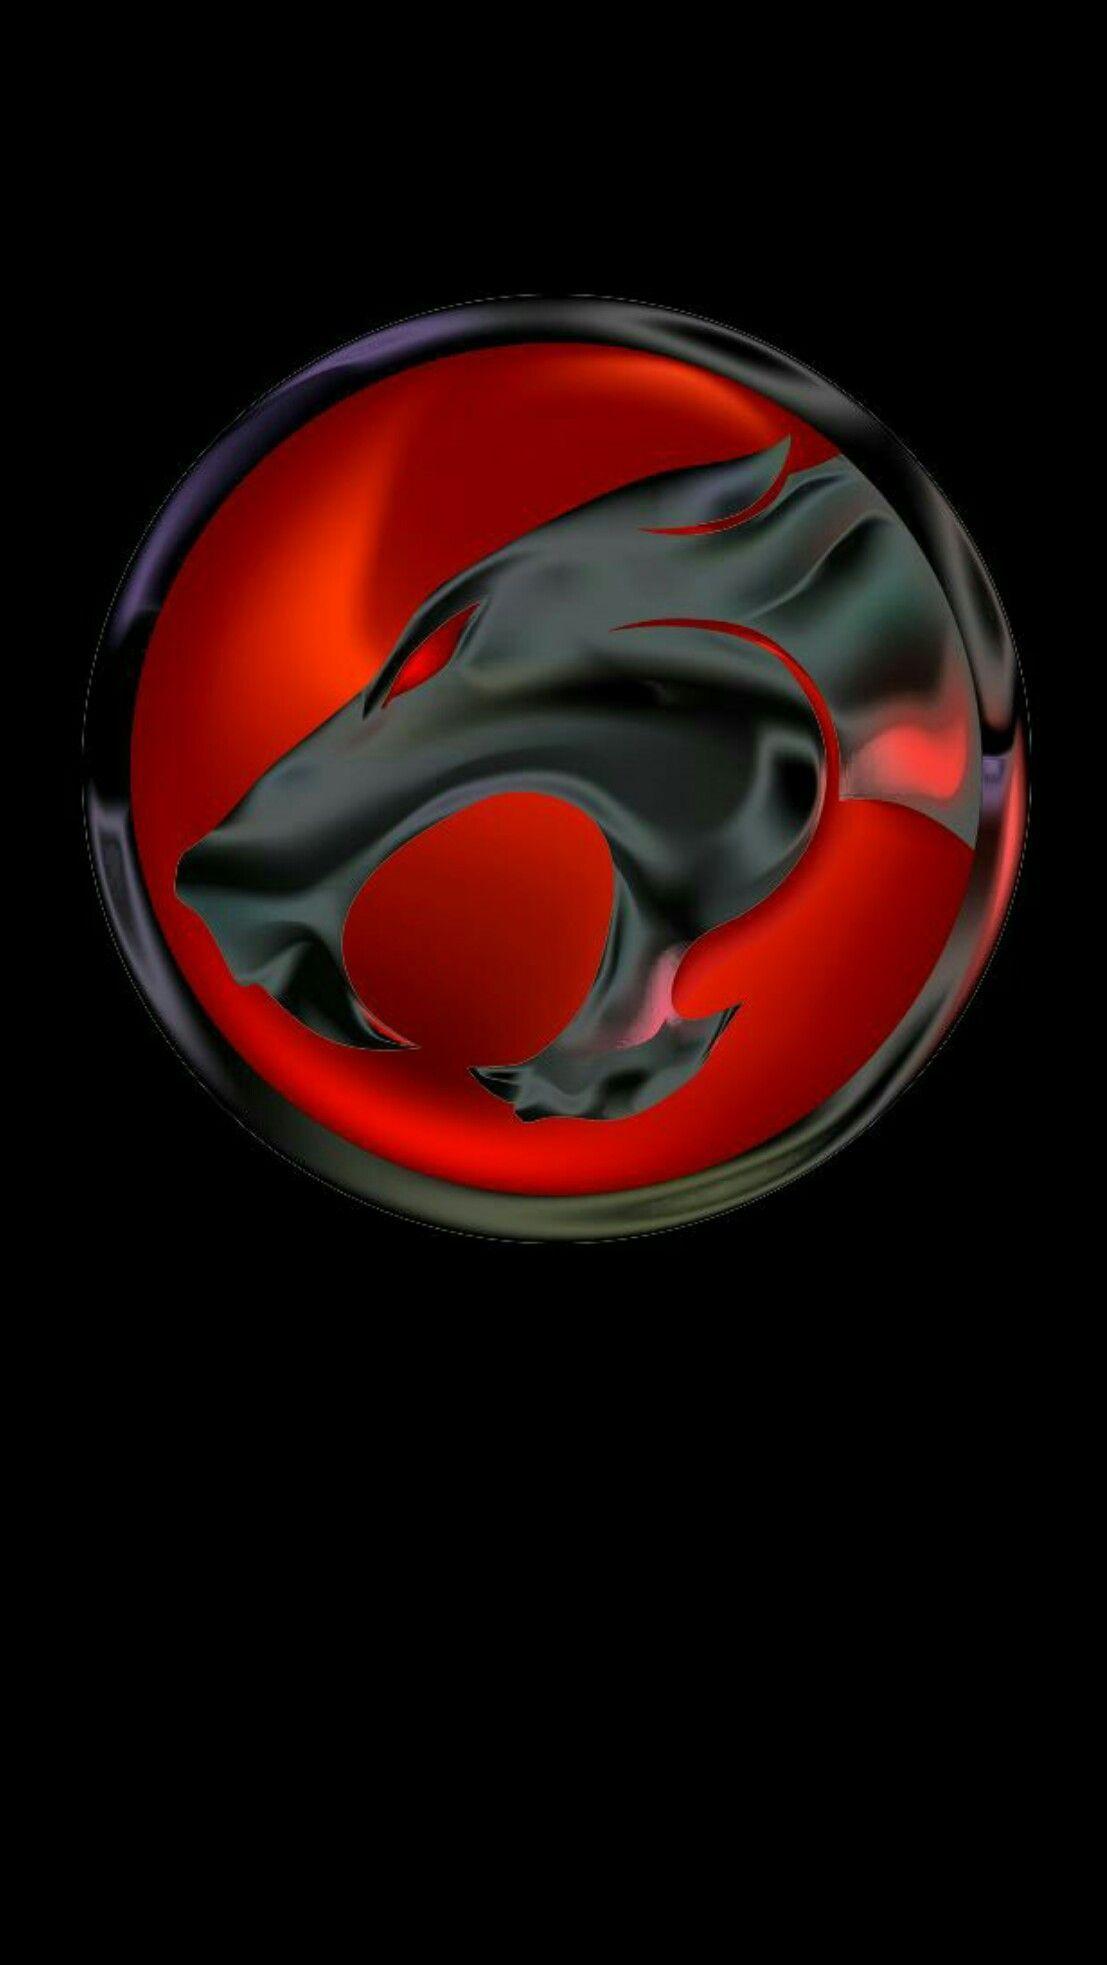 thundercats #black #wallpaper #android #iphone. Geeky Stuff